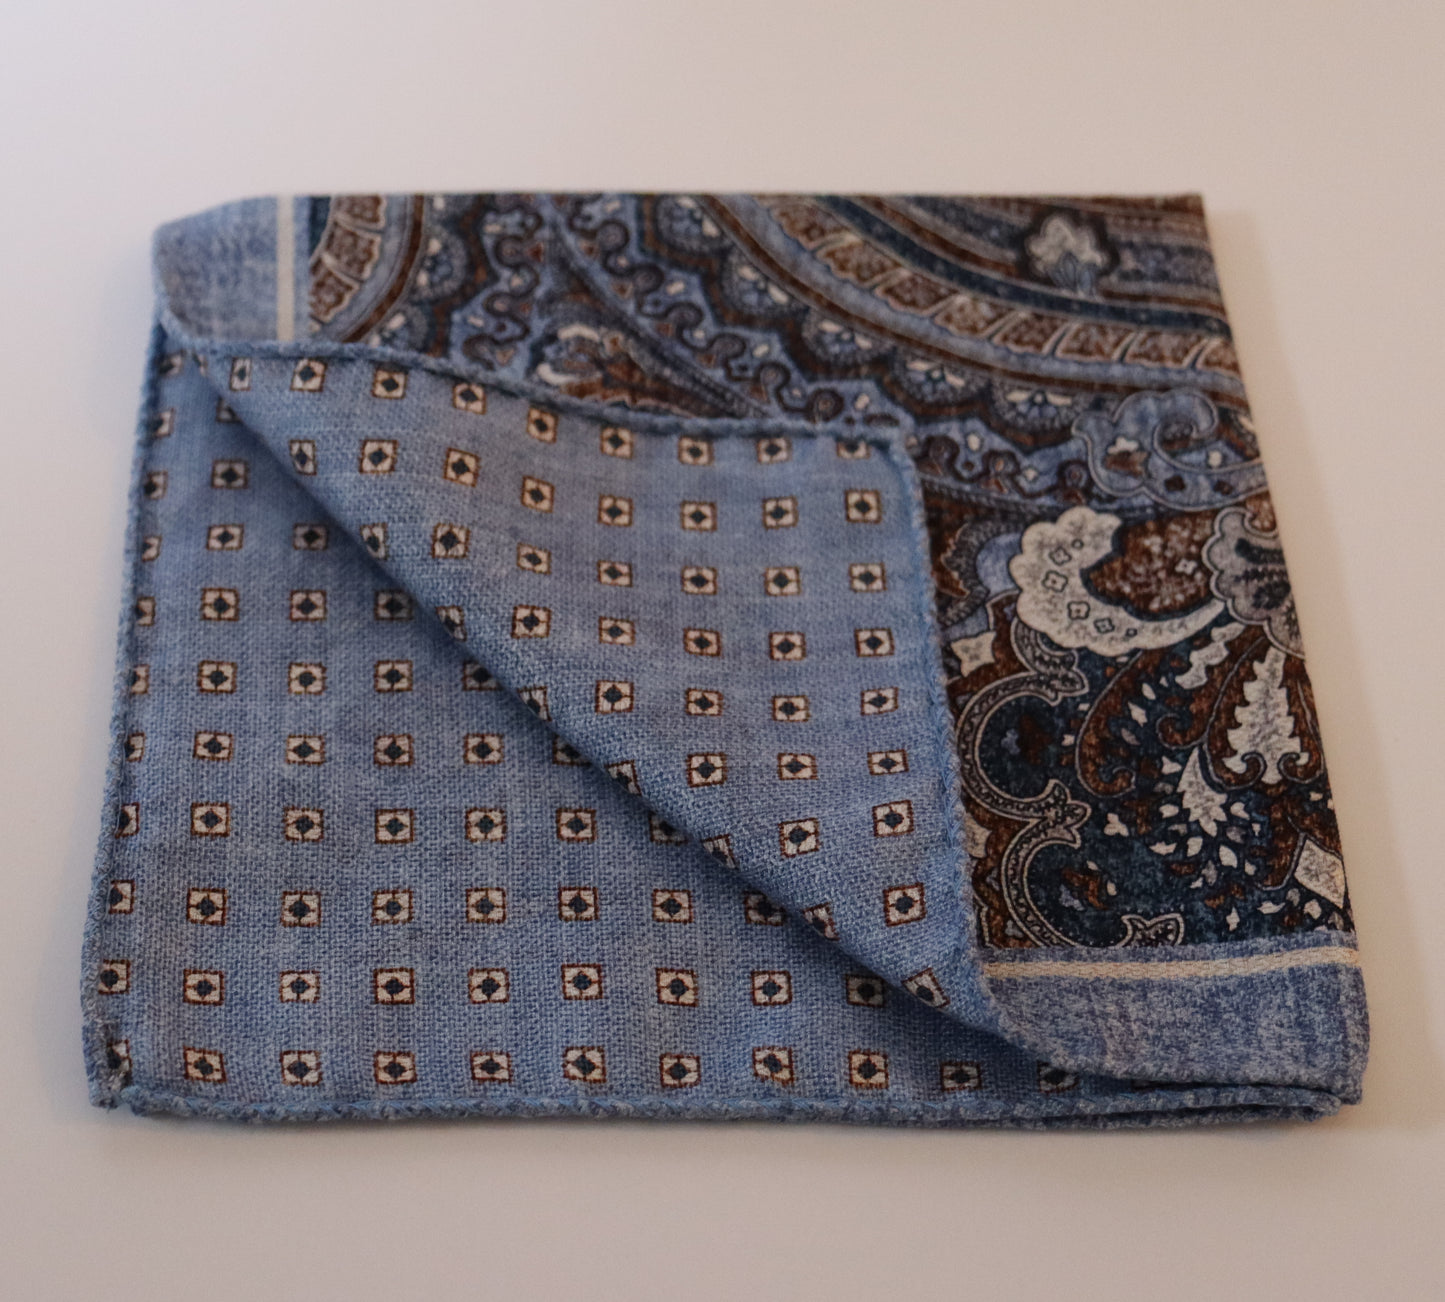 R. Hanauer Double Sided Paisley/Geometric Pocket Square - 3 Colors